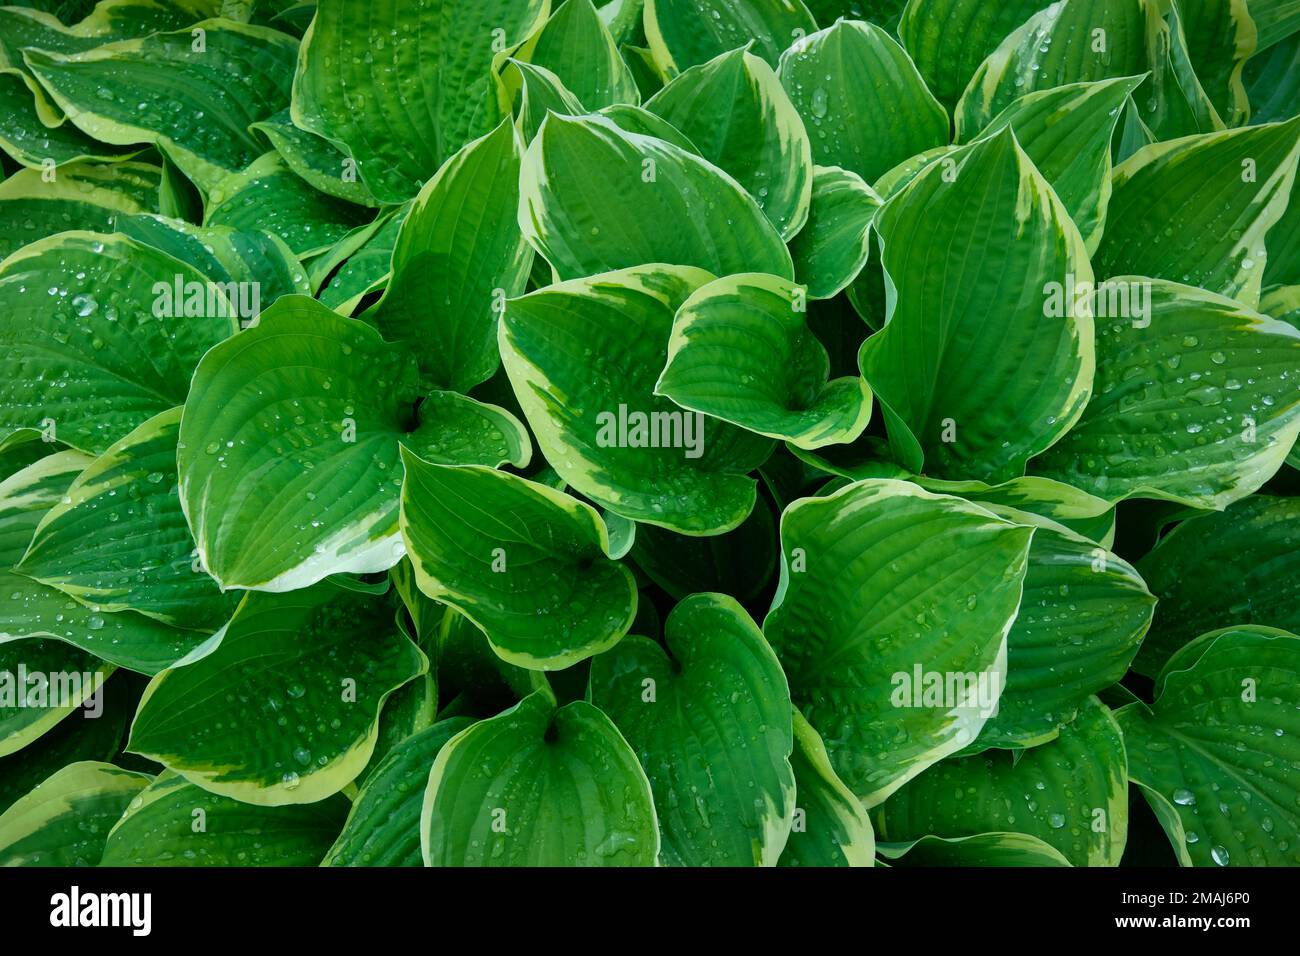 Hosta plant, plantain lily leaves with water drops, top view. Stock Photo